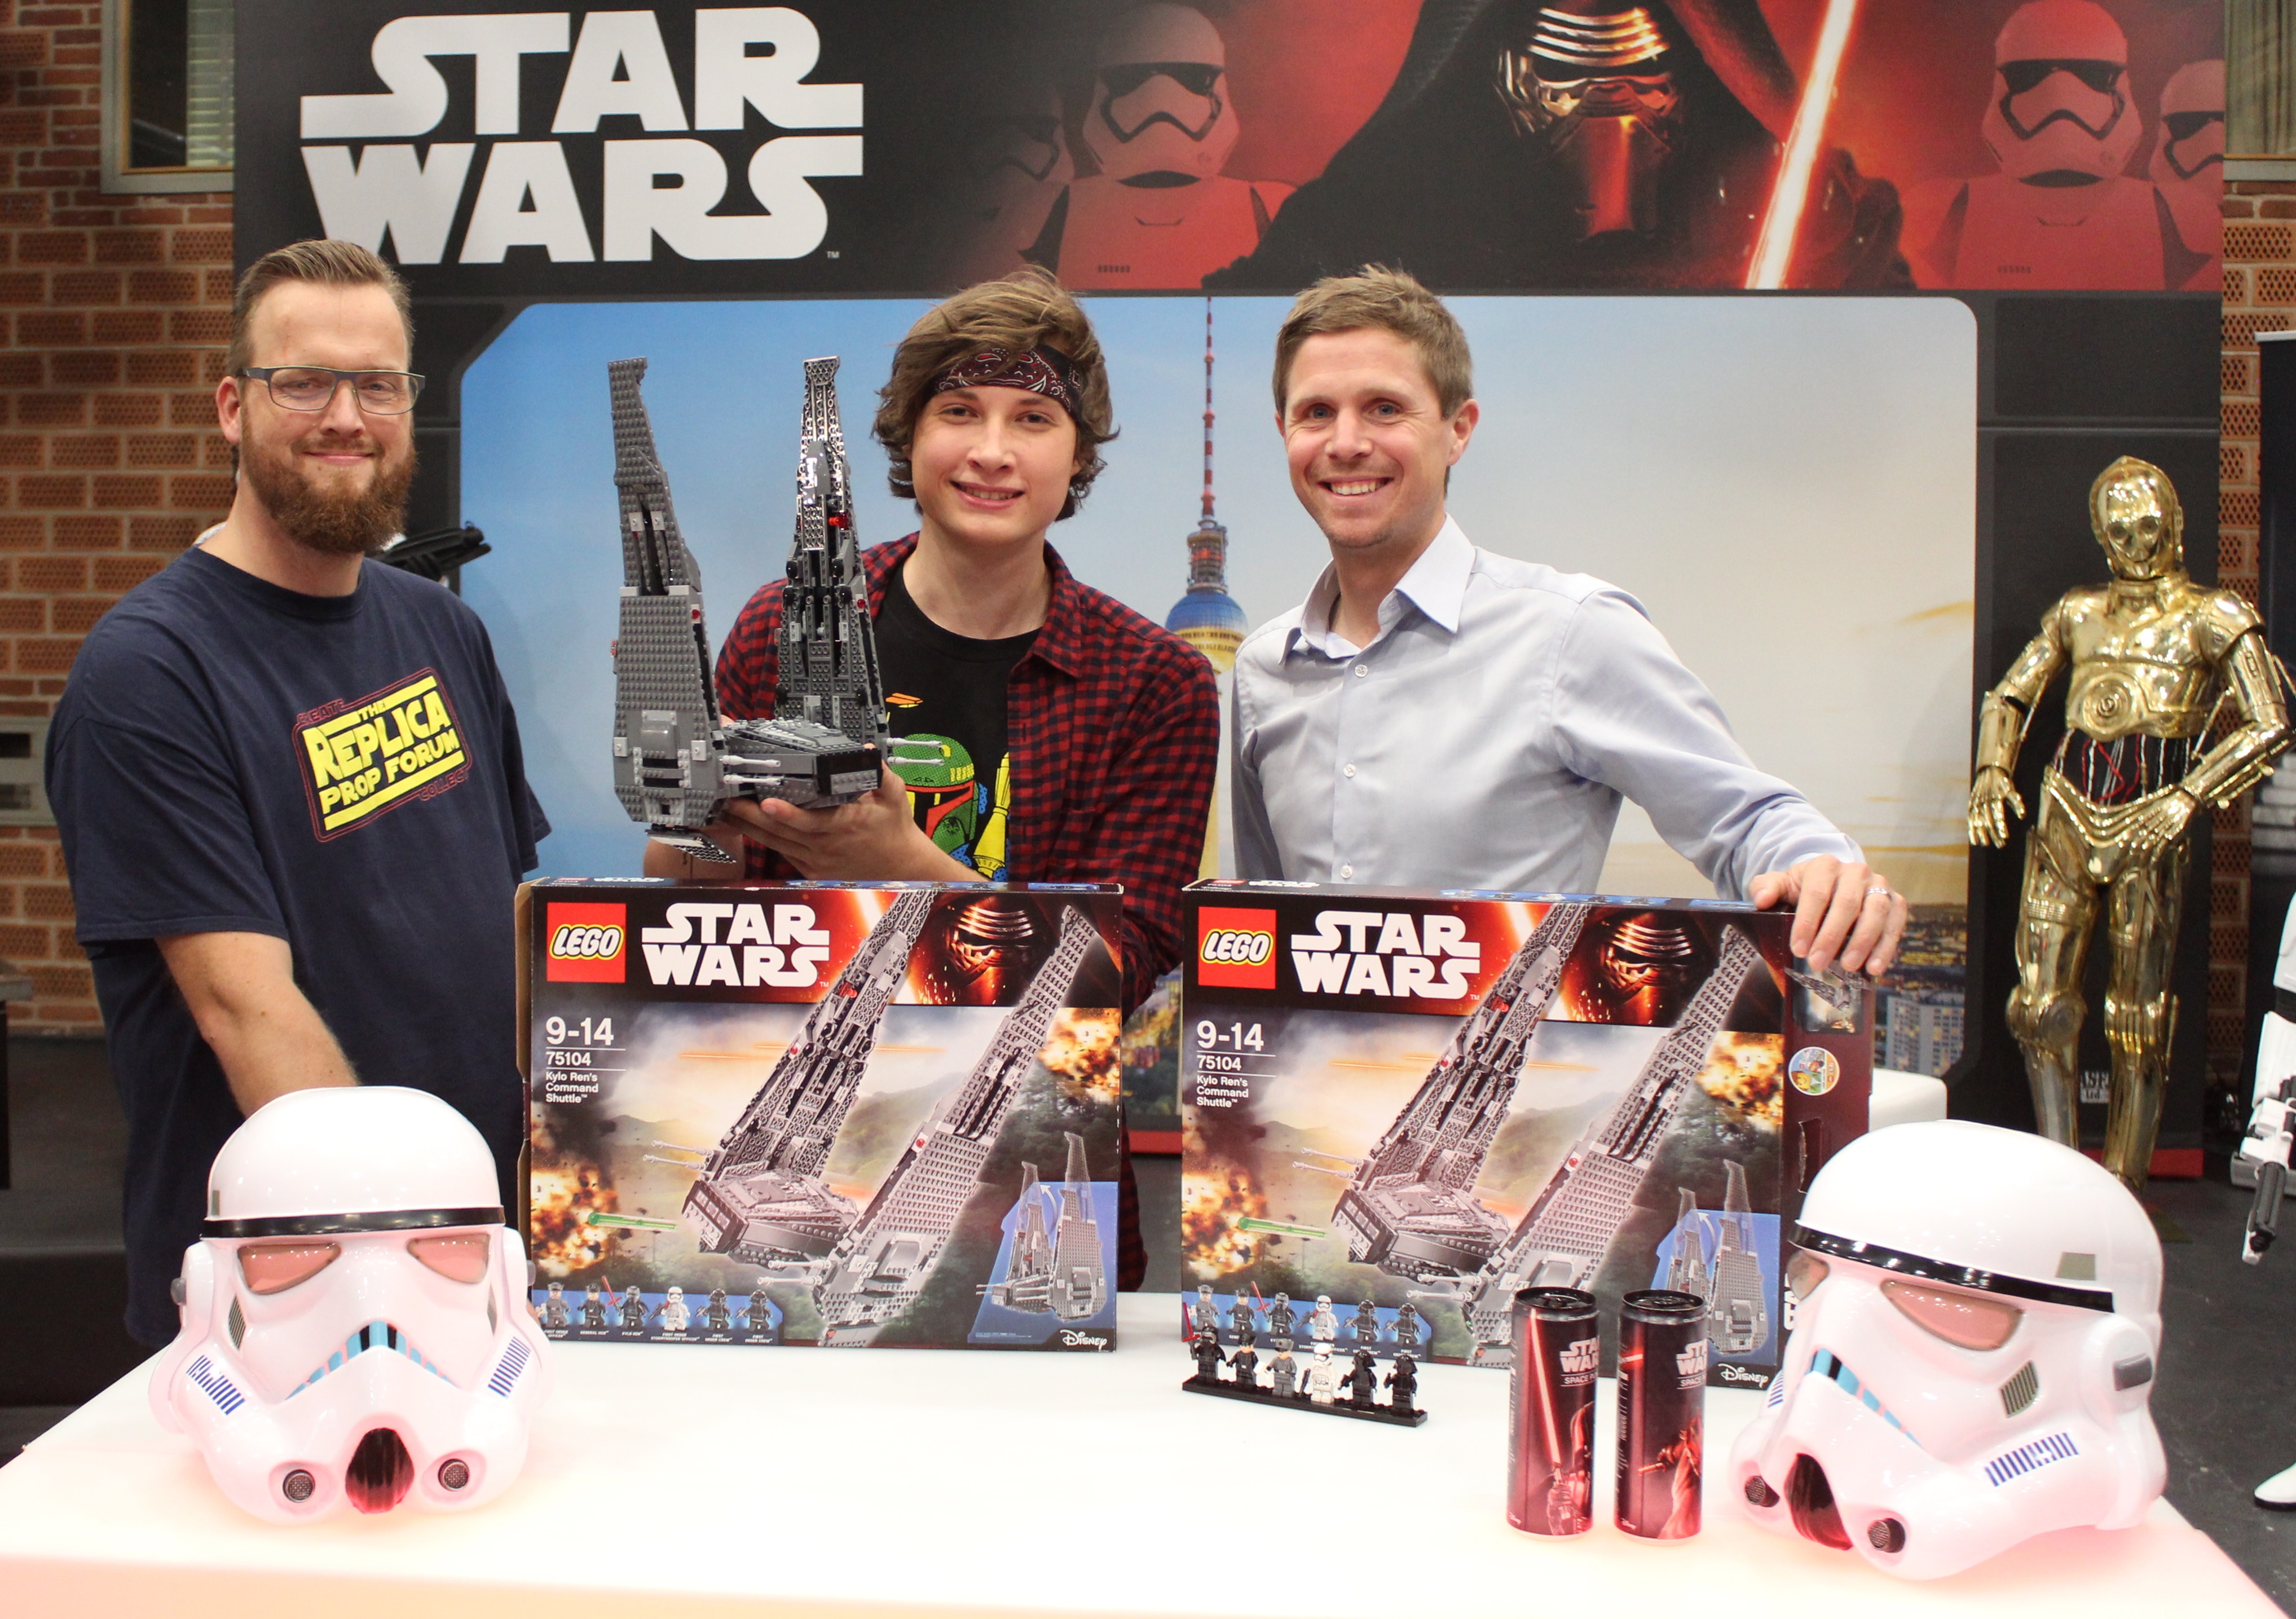 Reyst, a digital star from the Maker Studios network, unboxed LEGO Star Wars Kylo Ren’s Command Shuttle in Berlin, Germany on 3 September 2015 as part of the epic global event marking the countdown to ‘Force Friday’ when merchandise from the highly anticipated new movie goes on sale. Fans can tune in to watch live unboxing events, which unfolds over 18 hours, in 15 different cities and 12 countries on the YouTube Star Wars channel. Retailers around the the globe will open their doors at midnight on 9/4 and fans can document their experiences using #ForceFriday.